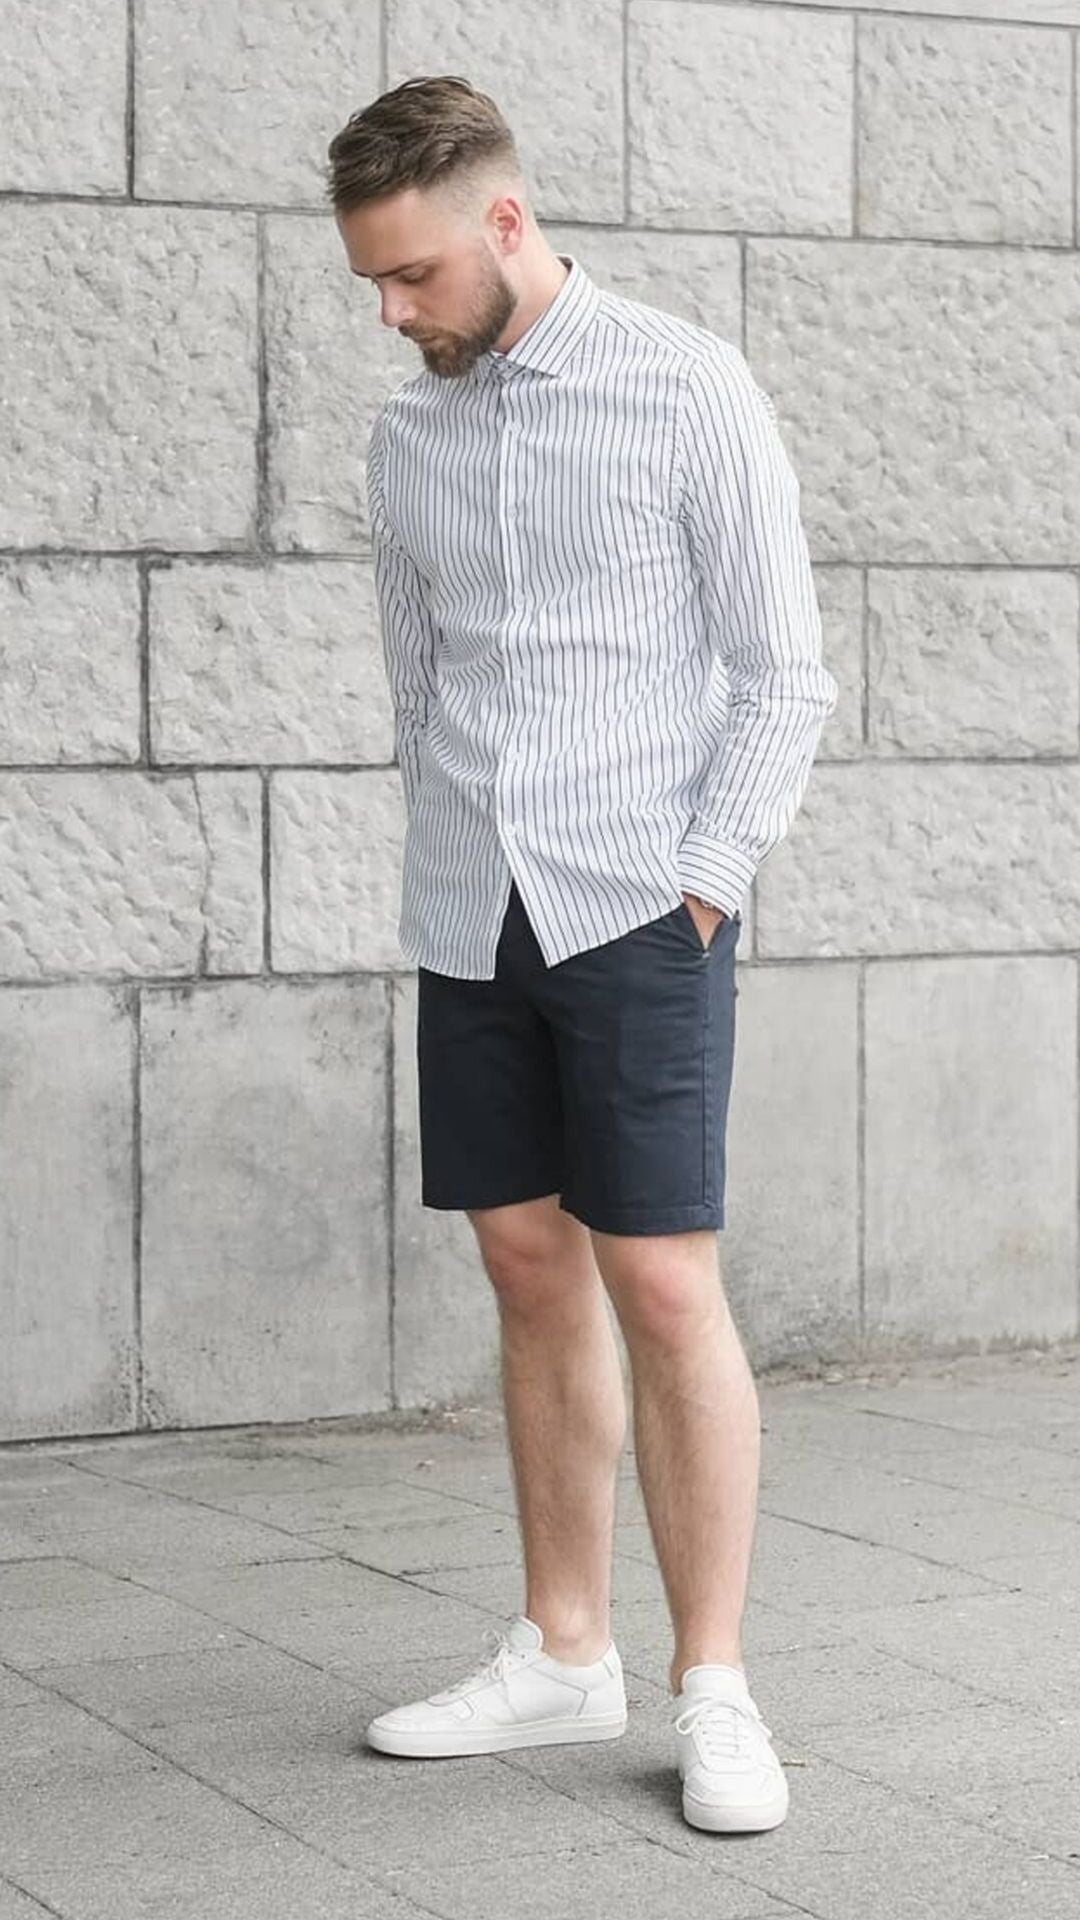 5 Simple Weekend Outfits For Men #simple #outfits #mens #fashion